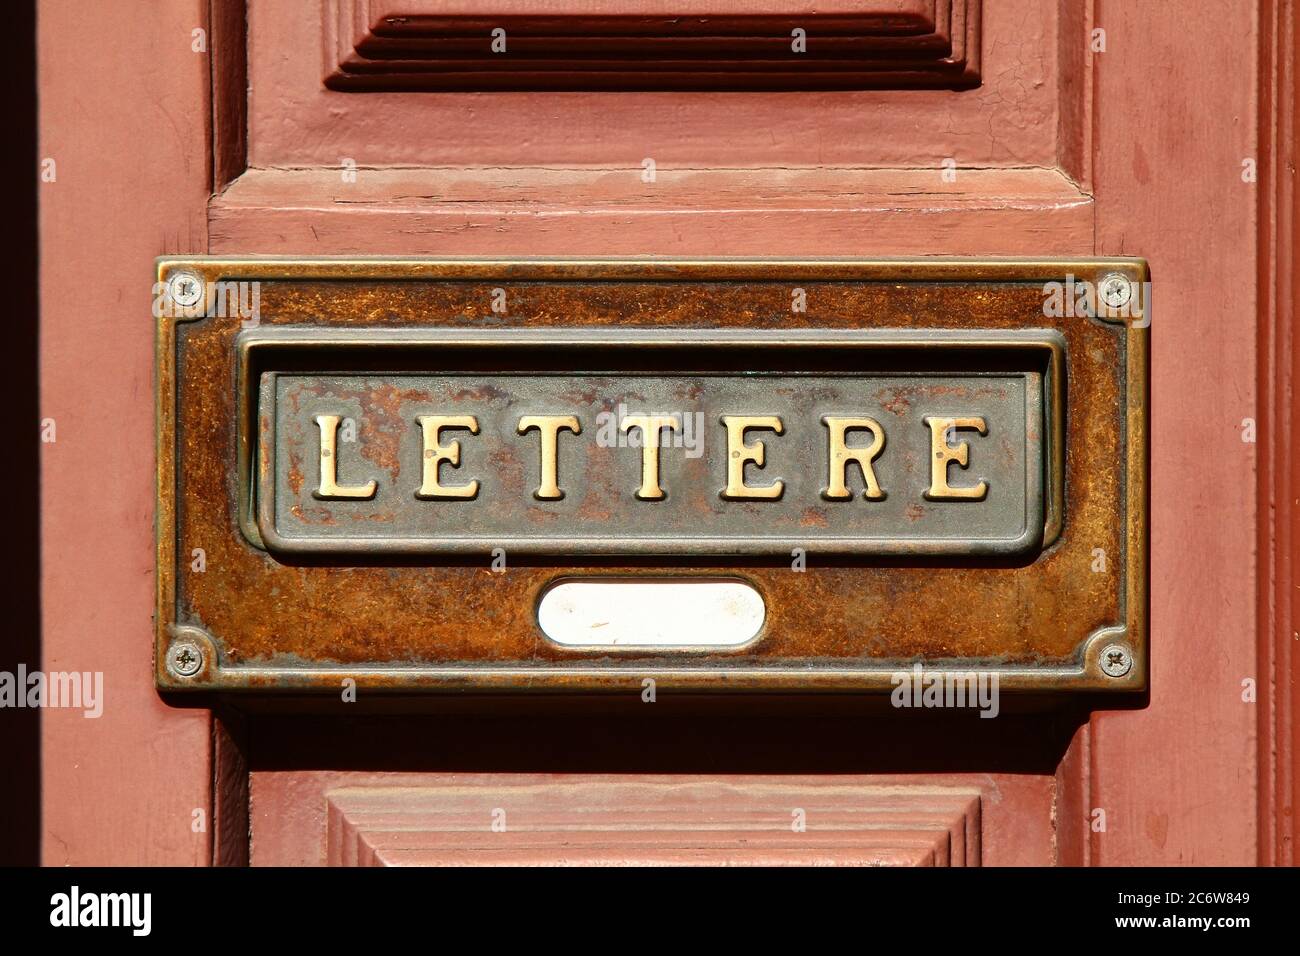 Decorative element. Vintage brass built-in mailbox with text 'lettere'. Pisa. Italy. Stock Photo